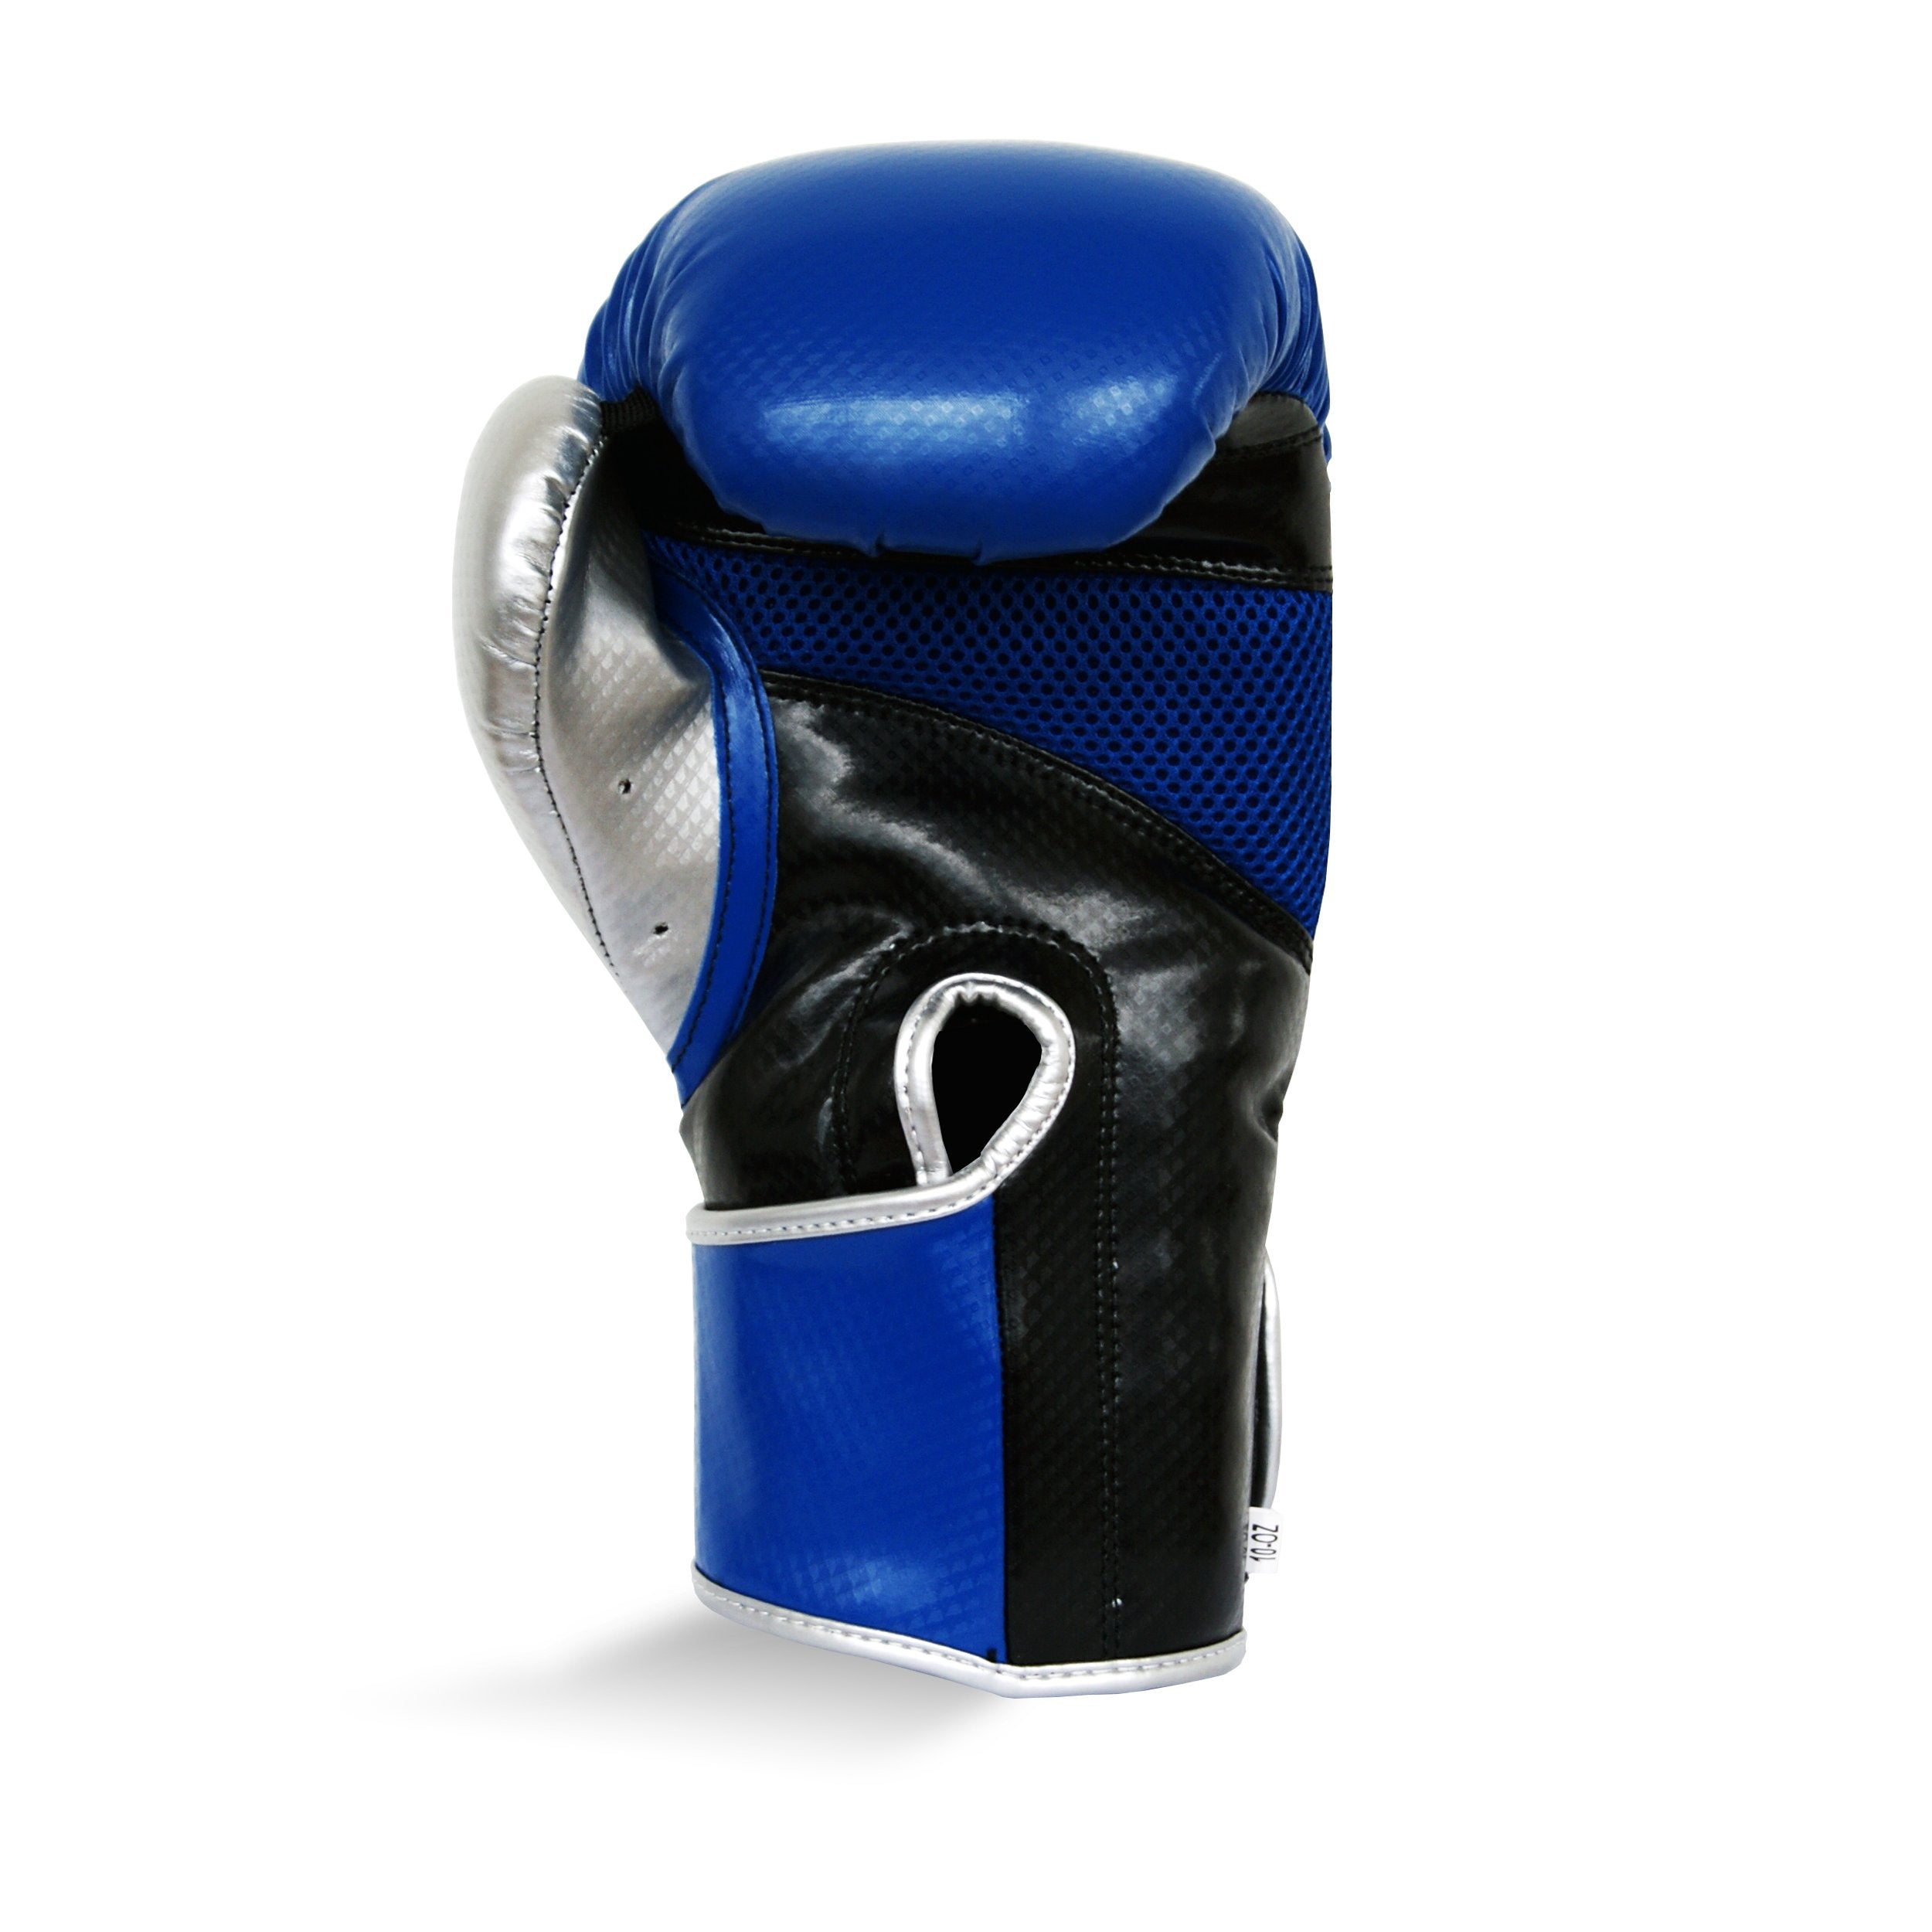 Pro Fitness Synthetic Leather Boxing Glove Metallic Navy / Black / Silver